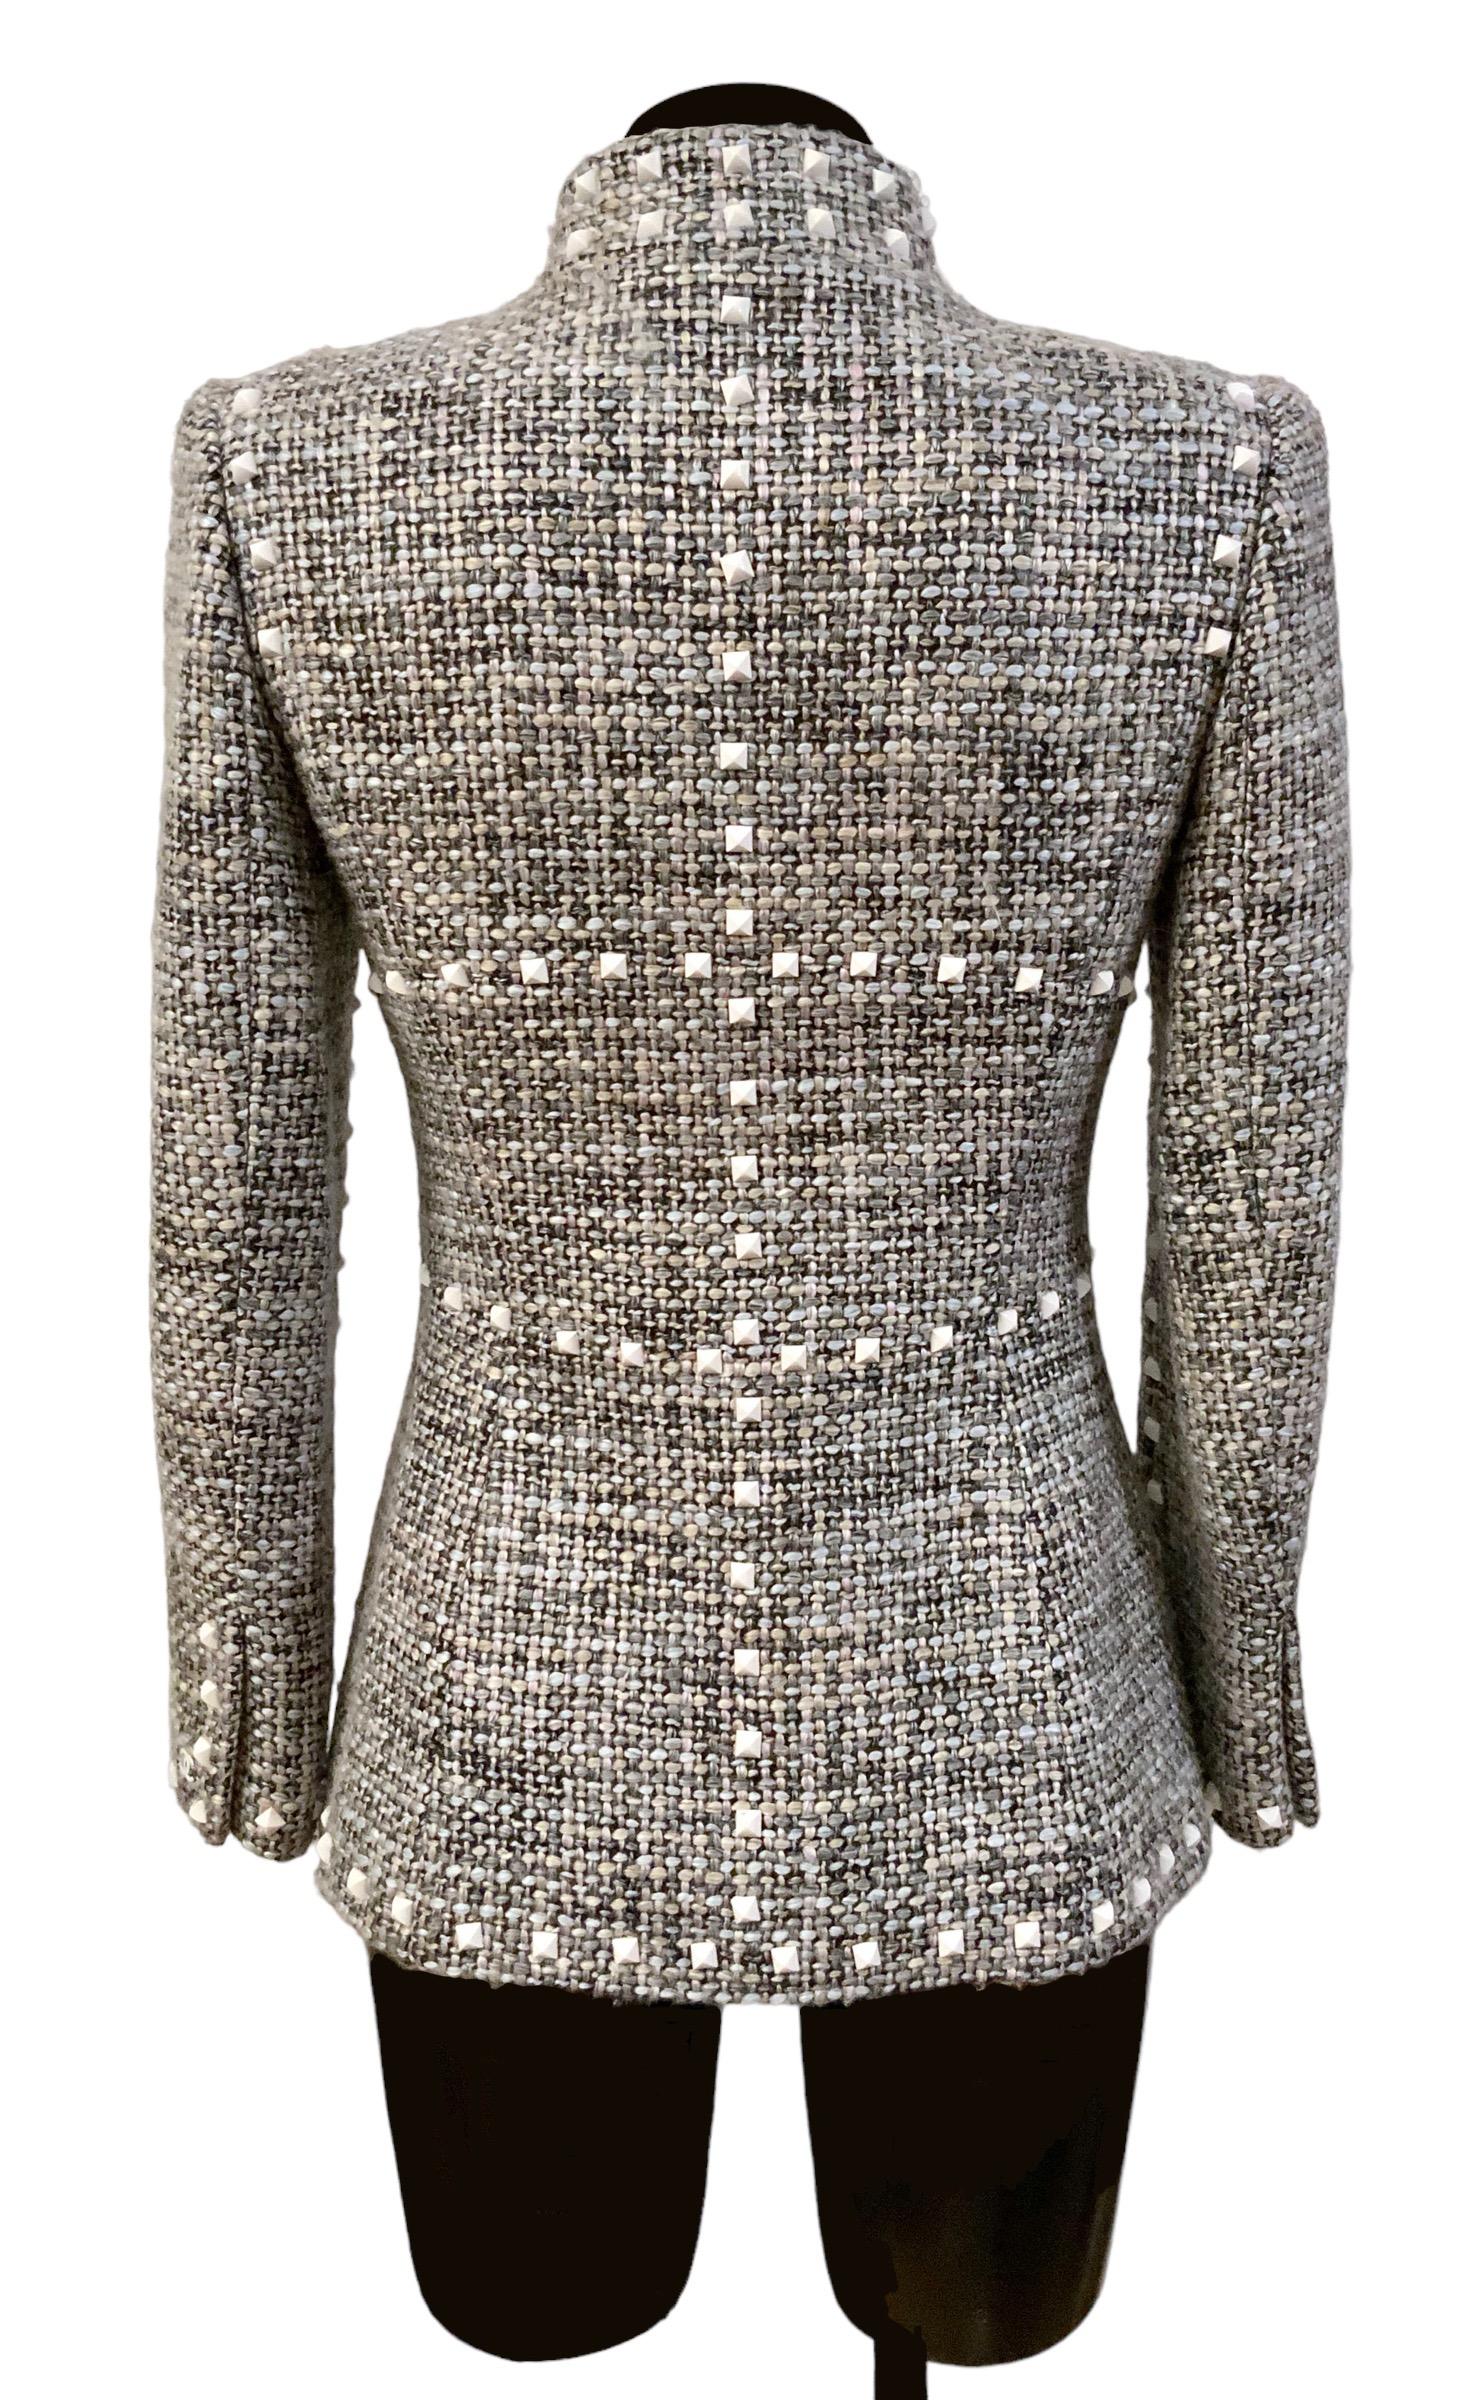 Beautiful piece from the 2003 Fall collection form the house of Chanel.
Being 20 years old, this jacket is timeless and easy to wear for any occasion !
A must in our closet !!!

Collection: Fall 2003
Material: 51% rayon - 46% wool - 3% nylon
Lining: